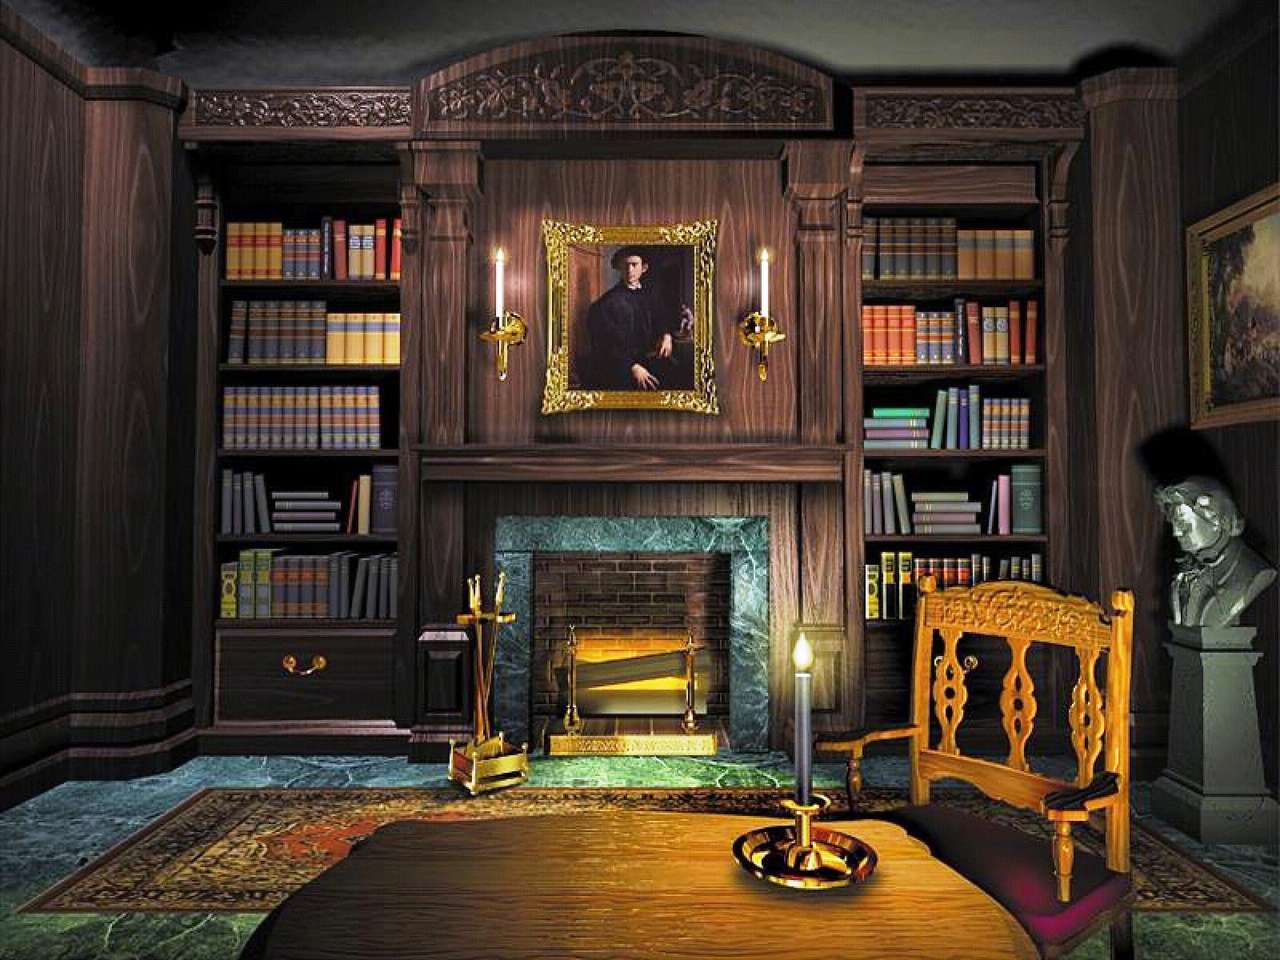 Secret Room - Windows 98 puzzle online from photo